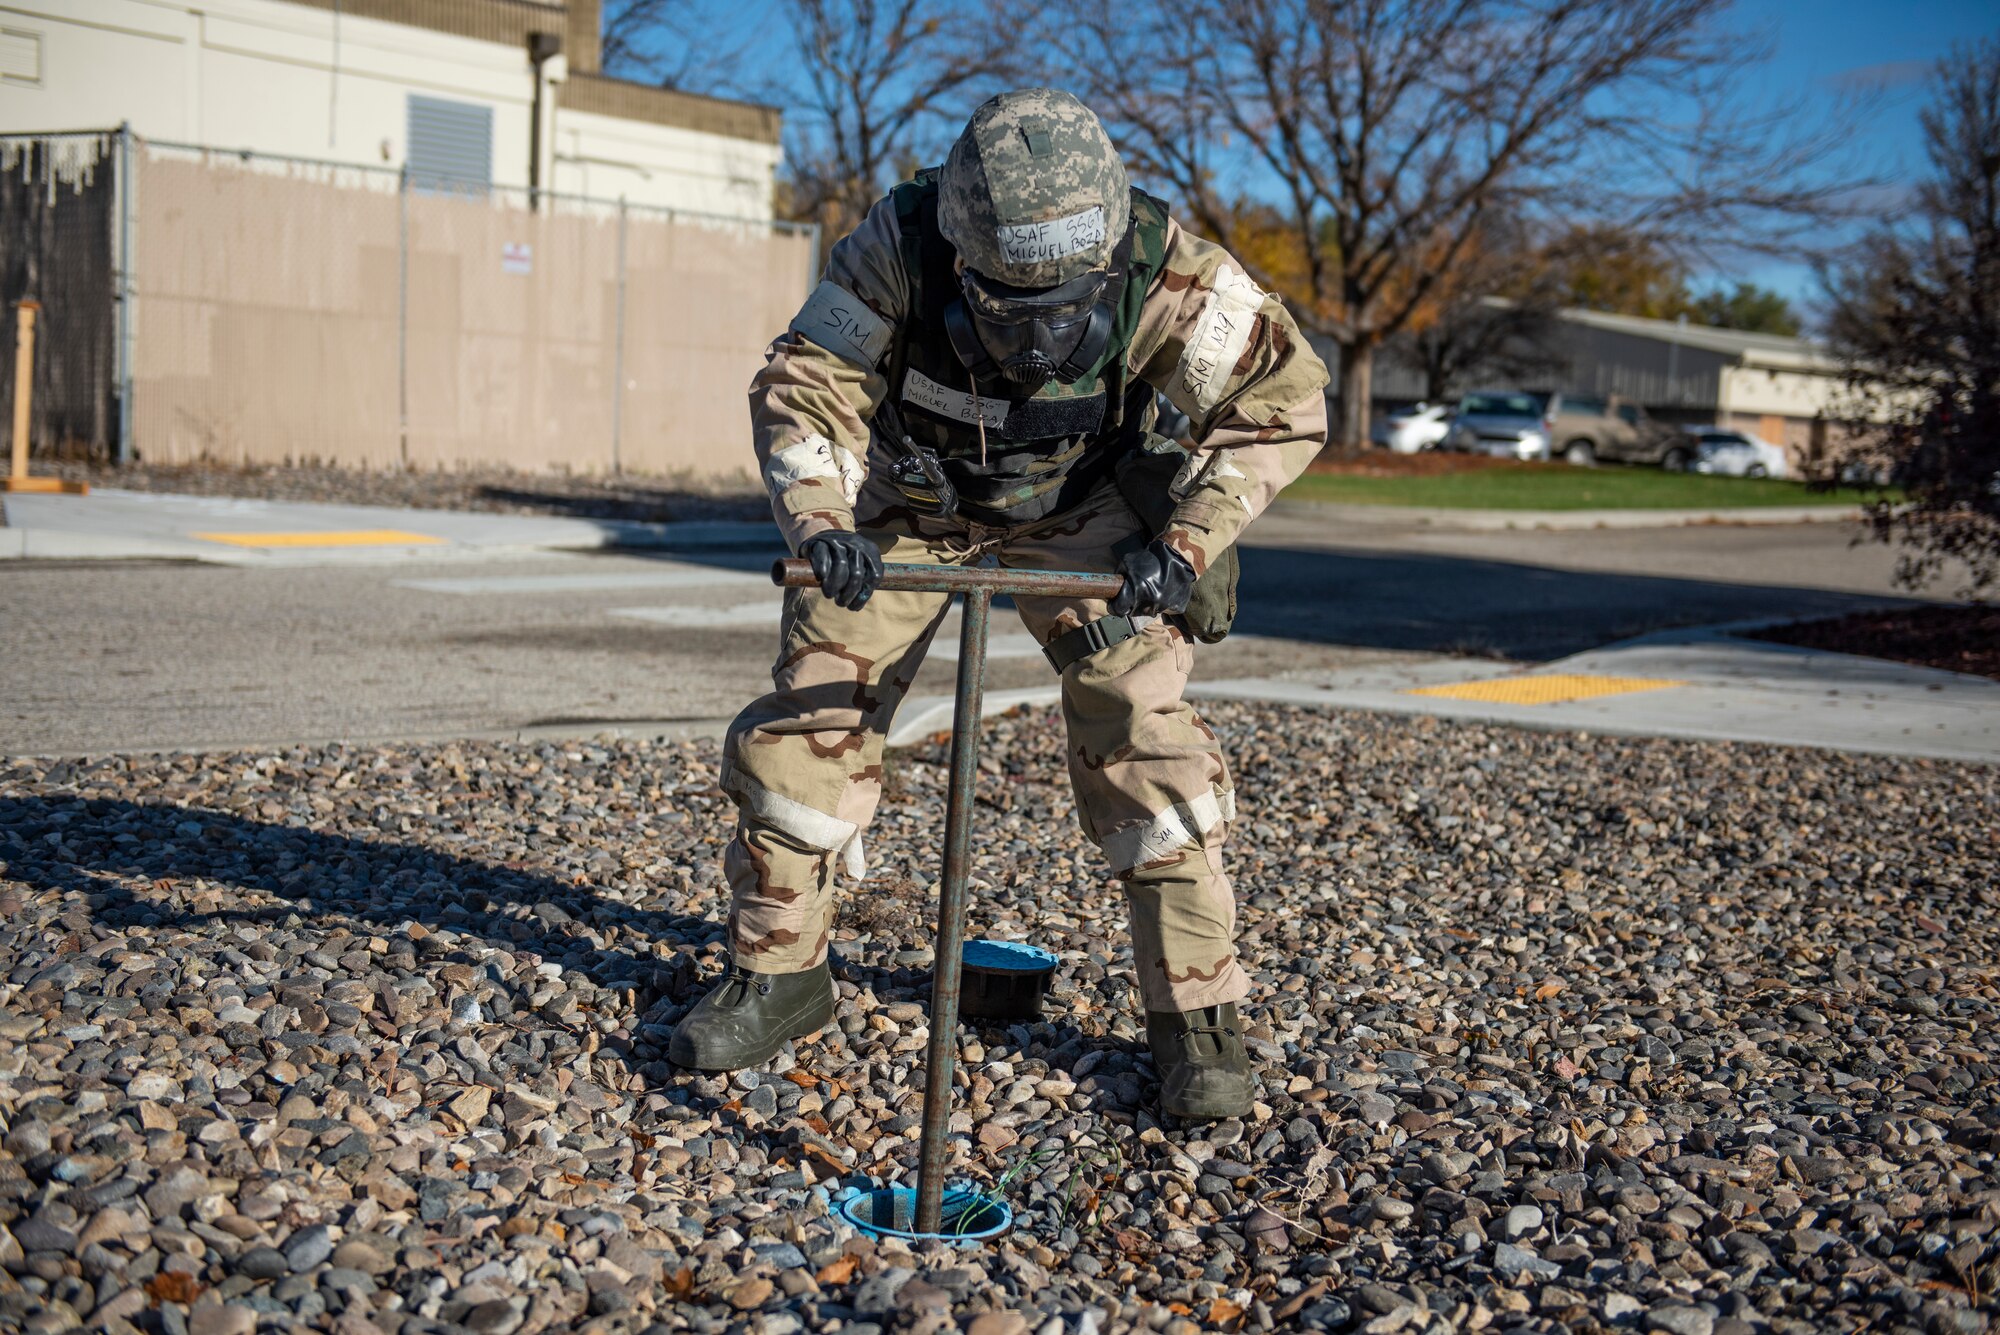 U.S. Air Force Staff Sgt. Miguel Boza, water and fuels system maintenance, 366th Civil Engineer Squadron, simulates shutting off water to a building after a simulated explosion during a Phase II exercise on Mountain Home Air Force Base, Idaho, Oct. 26, 2021. The purpose of Phase II training exercises is to test service members ability to survive and operate in a contested chemical environment.